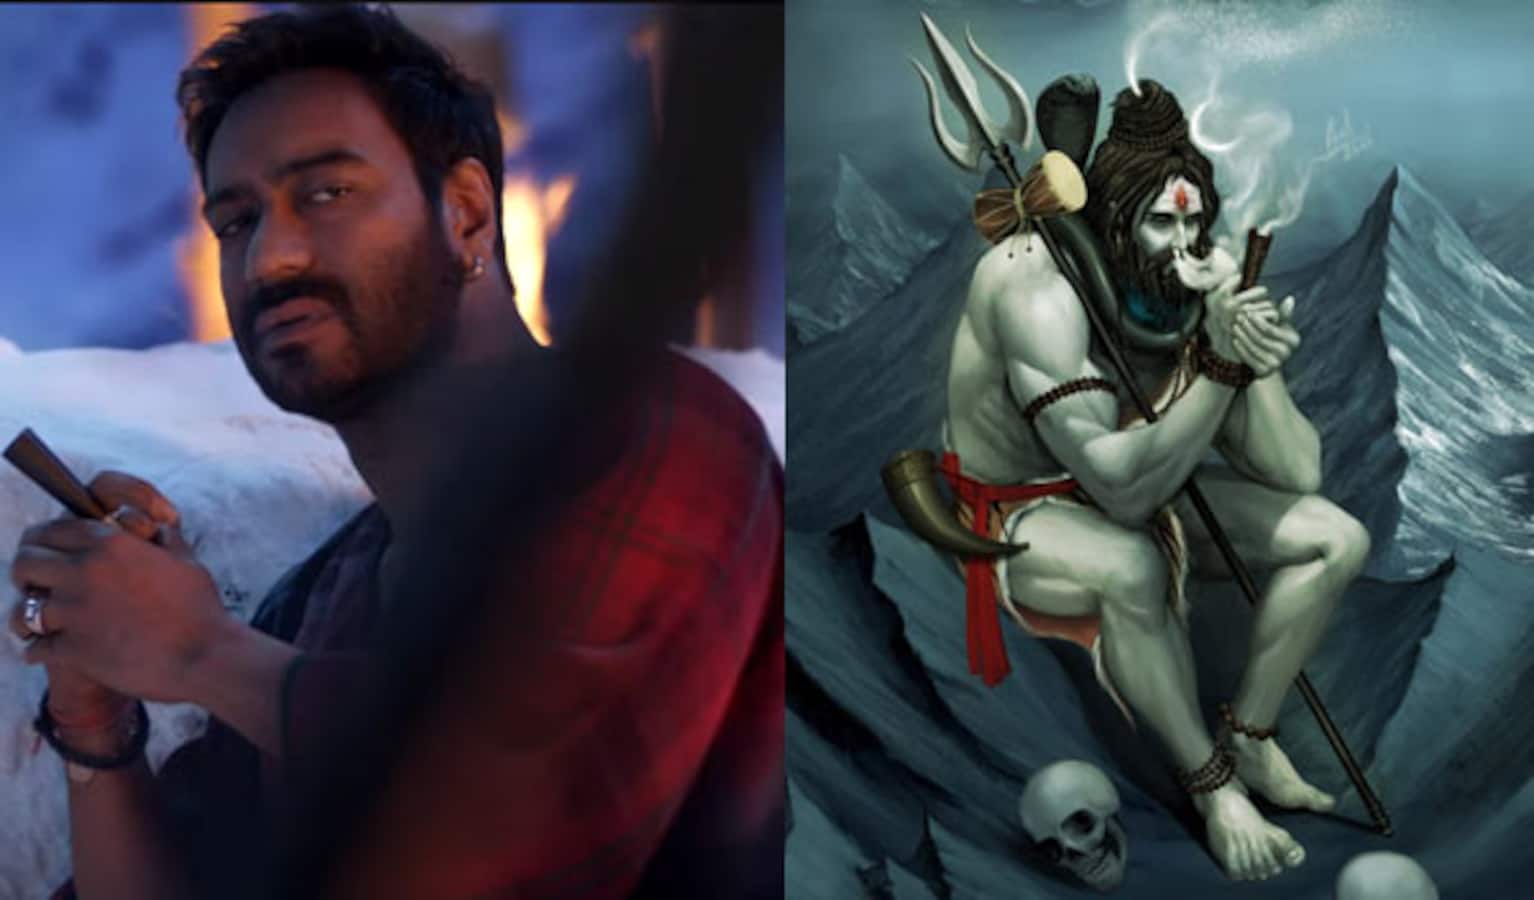 Ajay Devgn's Shivaay Trailer: In case you missed the Shiva connection -  here it is! - Bollywood News & Gossip, Movie Reviews, Trailers & Videos at  